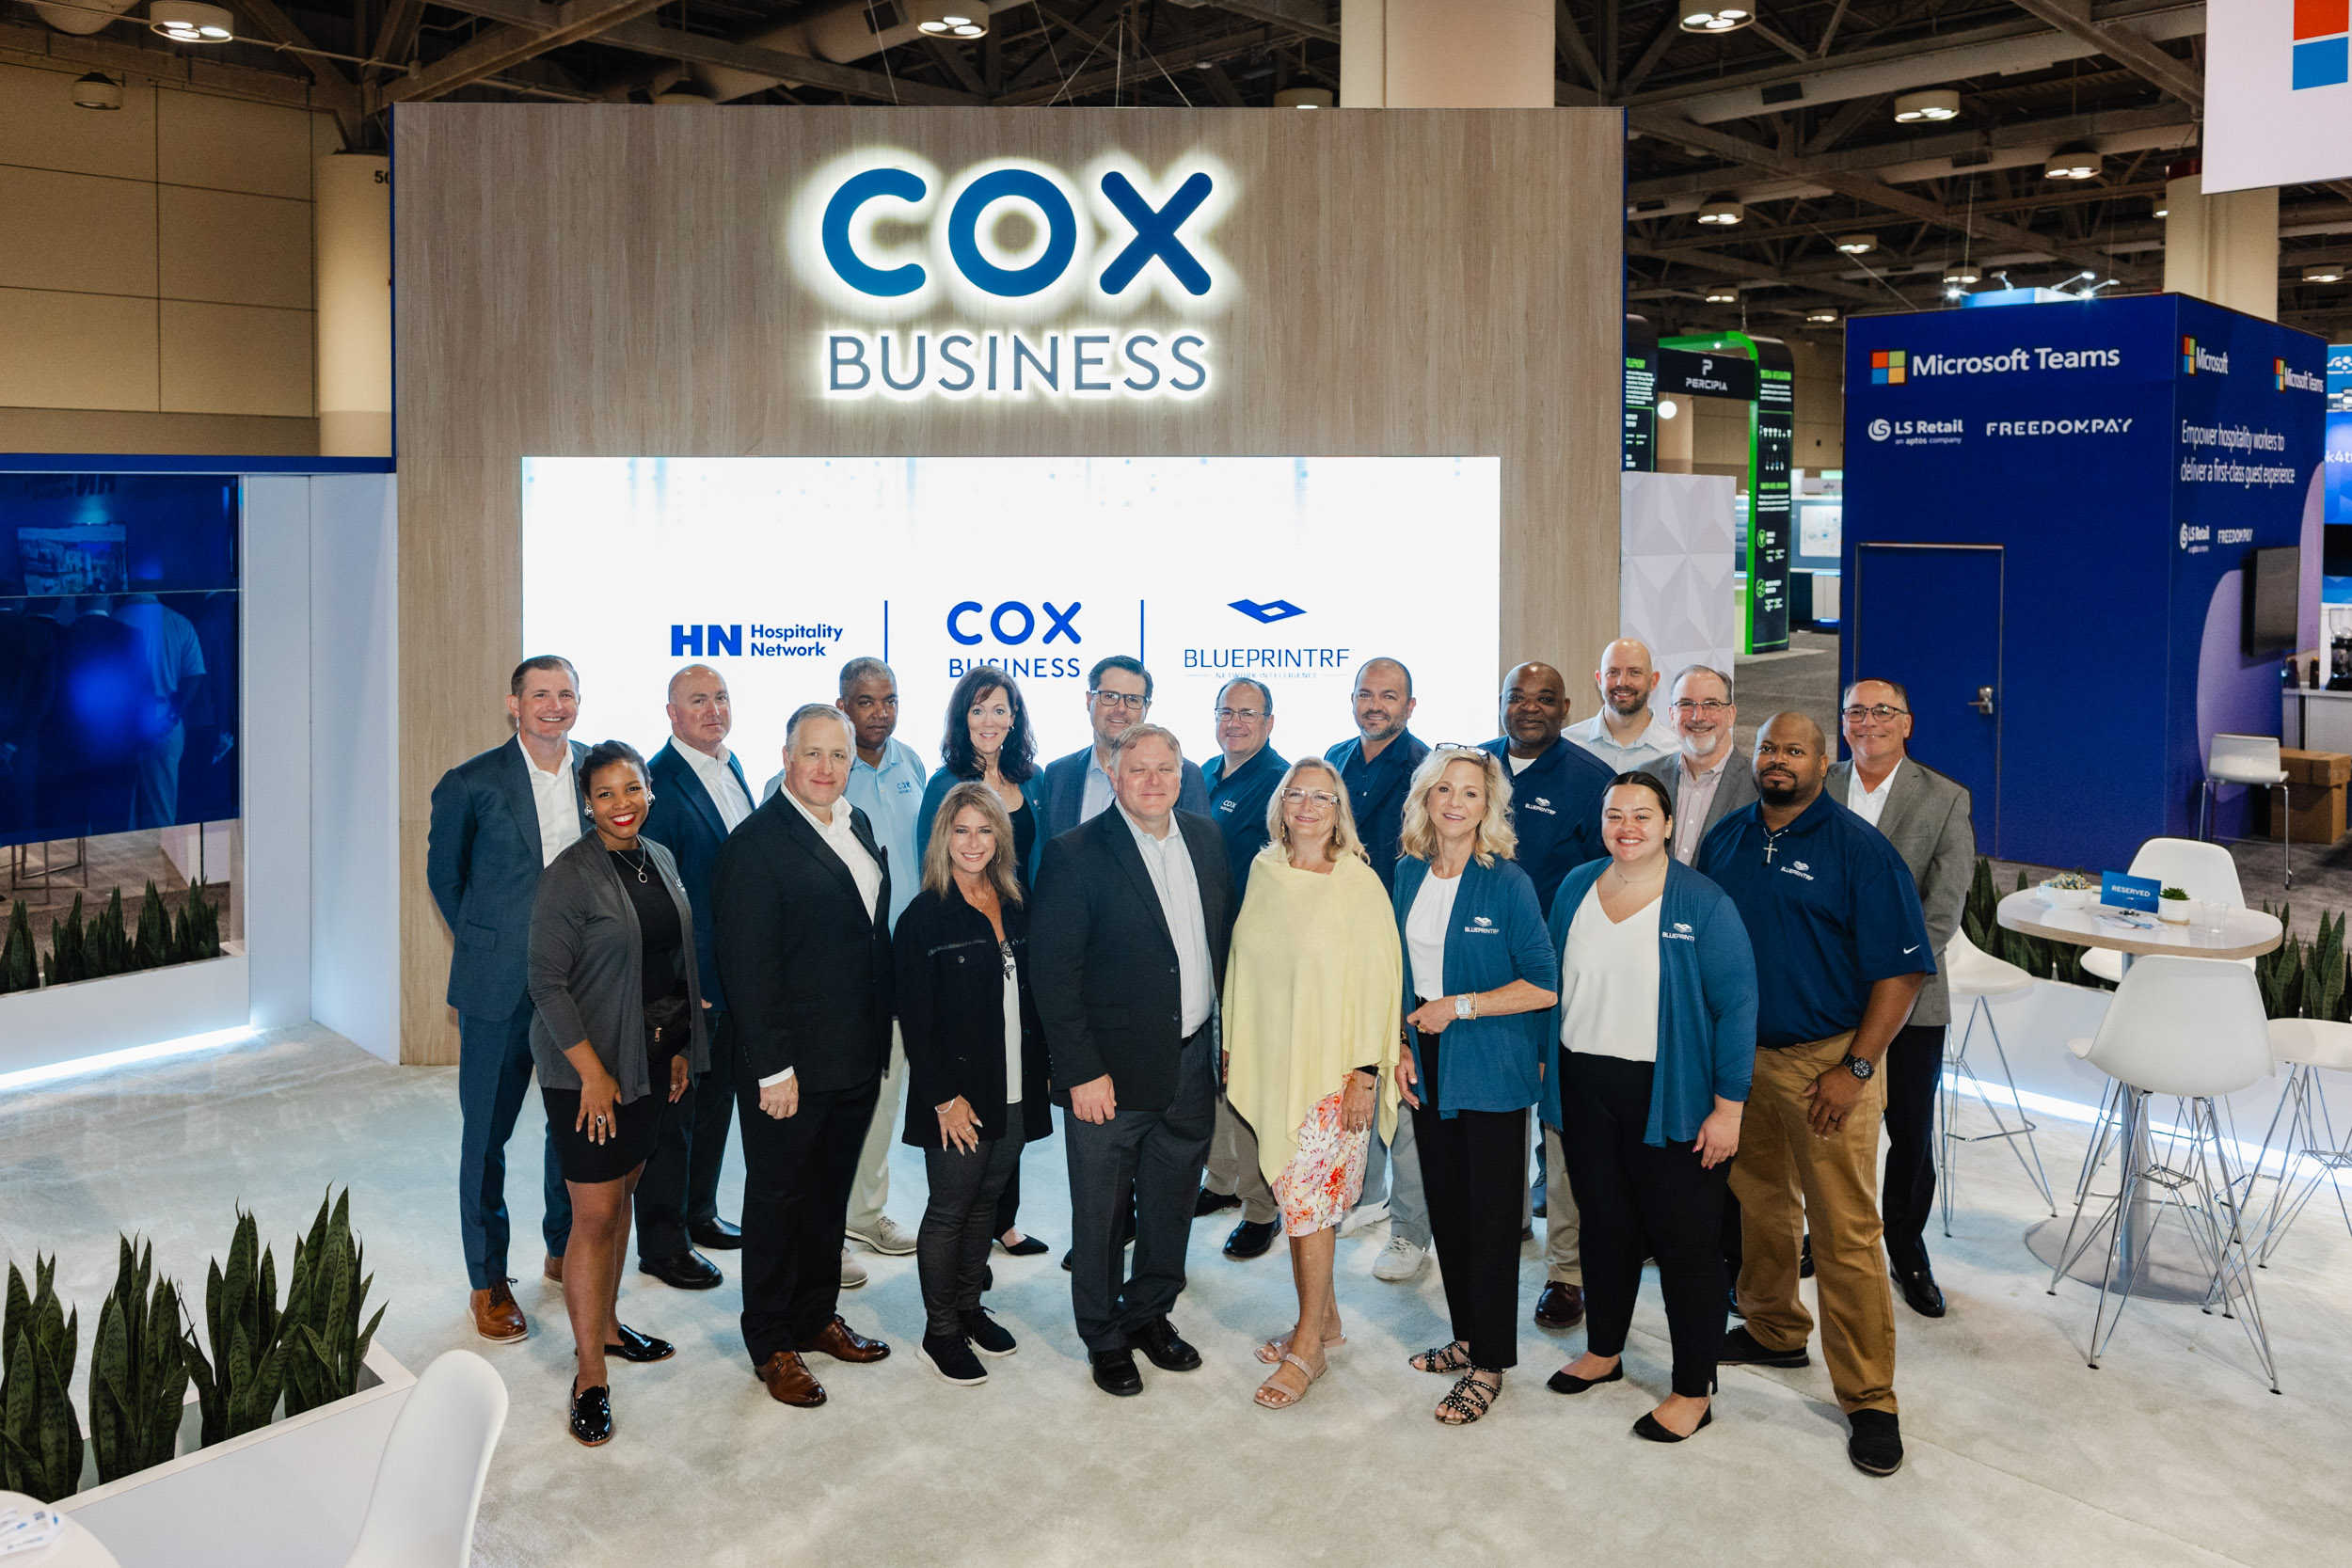 A group of people standing in front of a Cox Business booth at a Toronto trade show.